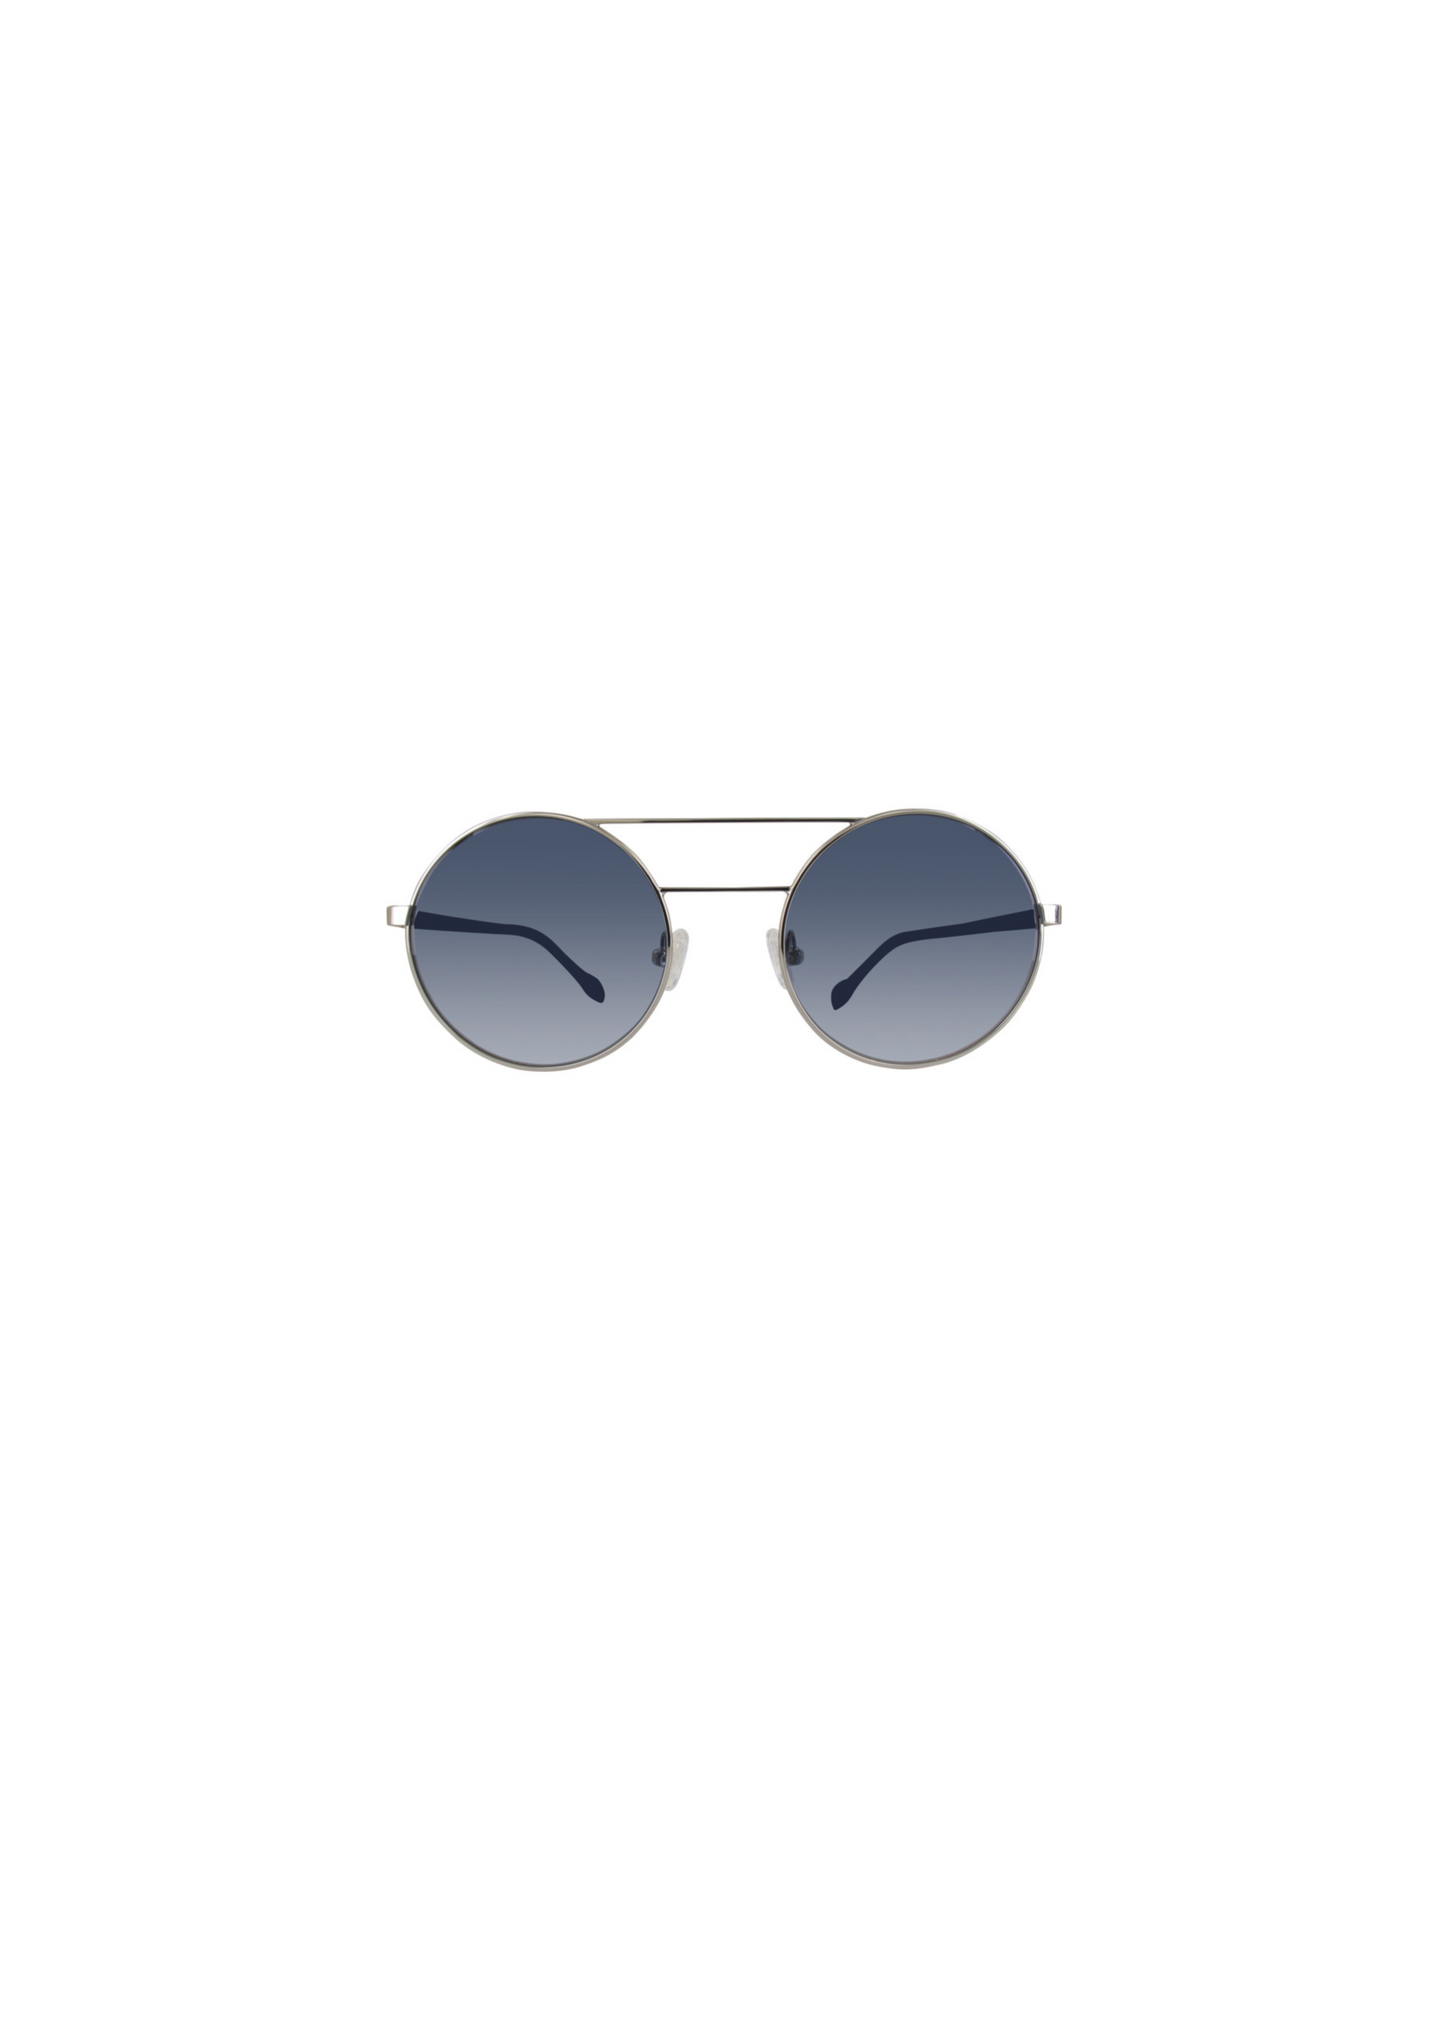 G FERRE’ GFF1240-005-51  New Sunglasses designed by Gianfranco Ferre in Shiny SILVERTONE / Havana . High quality original lenses, 100% UV 3 protection. Details MATERIAL: Metal COLOR: SILVER MODEL: GFF1240/005 Sunglasses Condition A+.